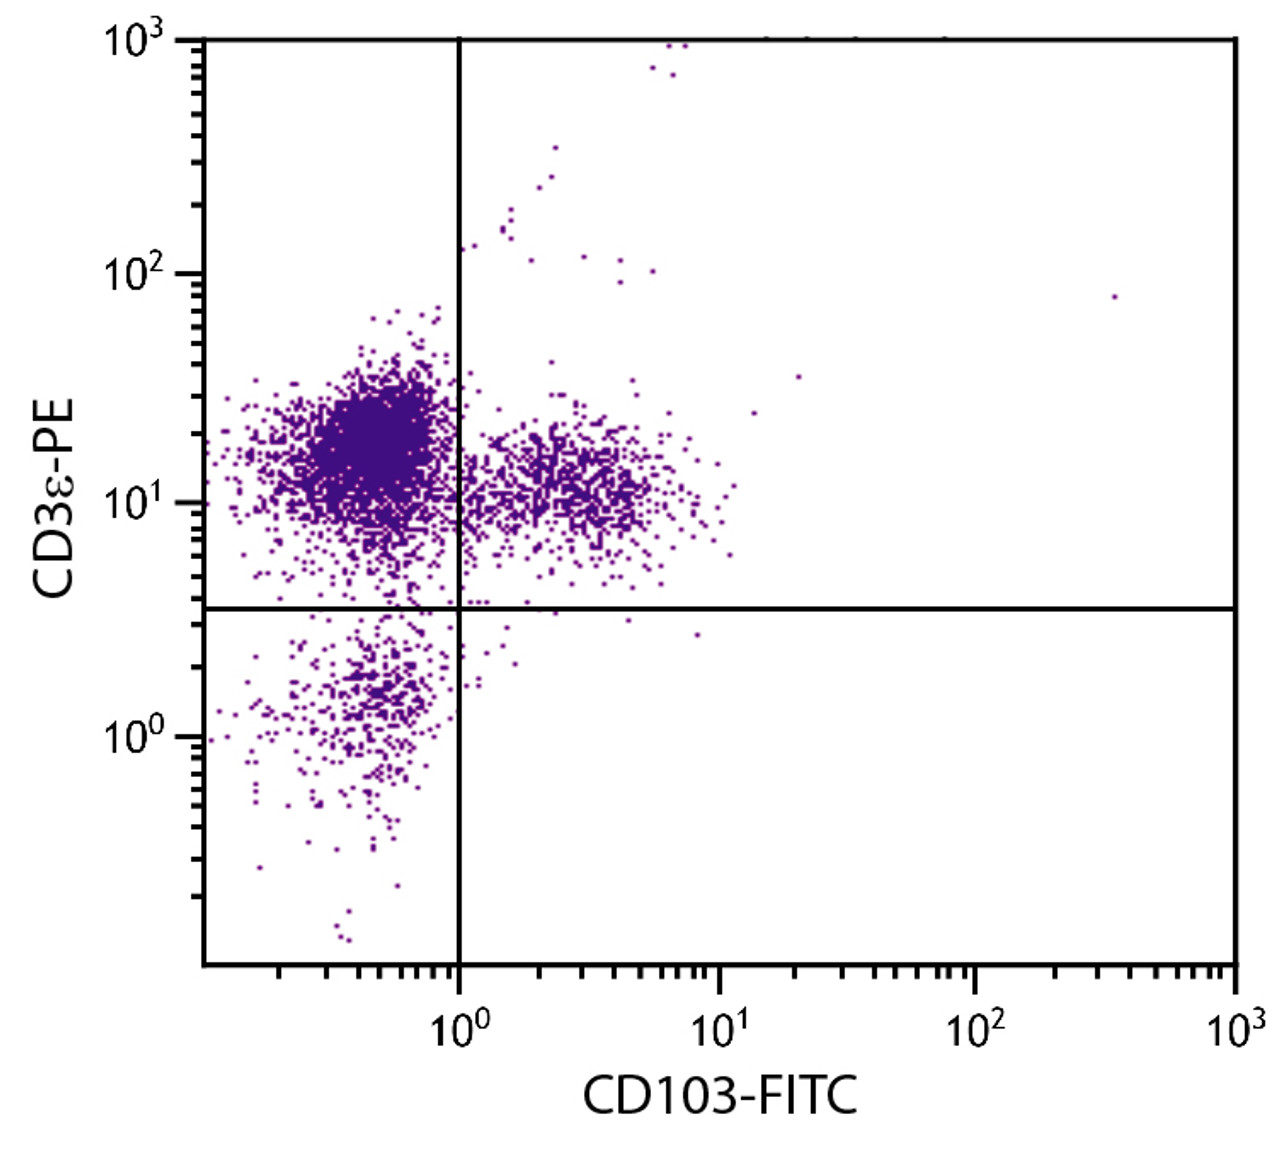 CD-1 mouse mesenteric lymph node cells were stained with Hamster Anti-Mouse CD103-FITC (Cat. No. 98-975) and Rat Anti-Mouse CD3?-PE .